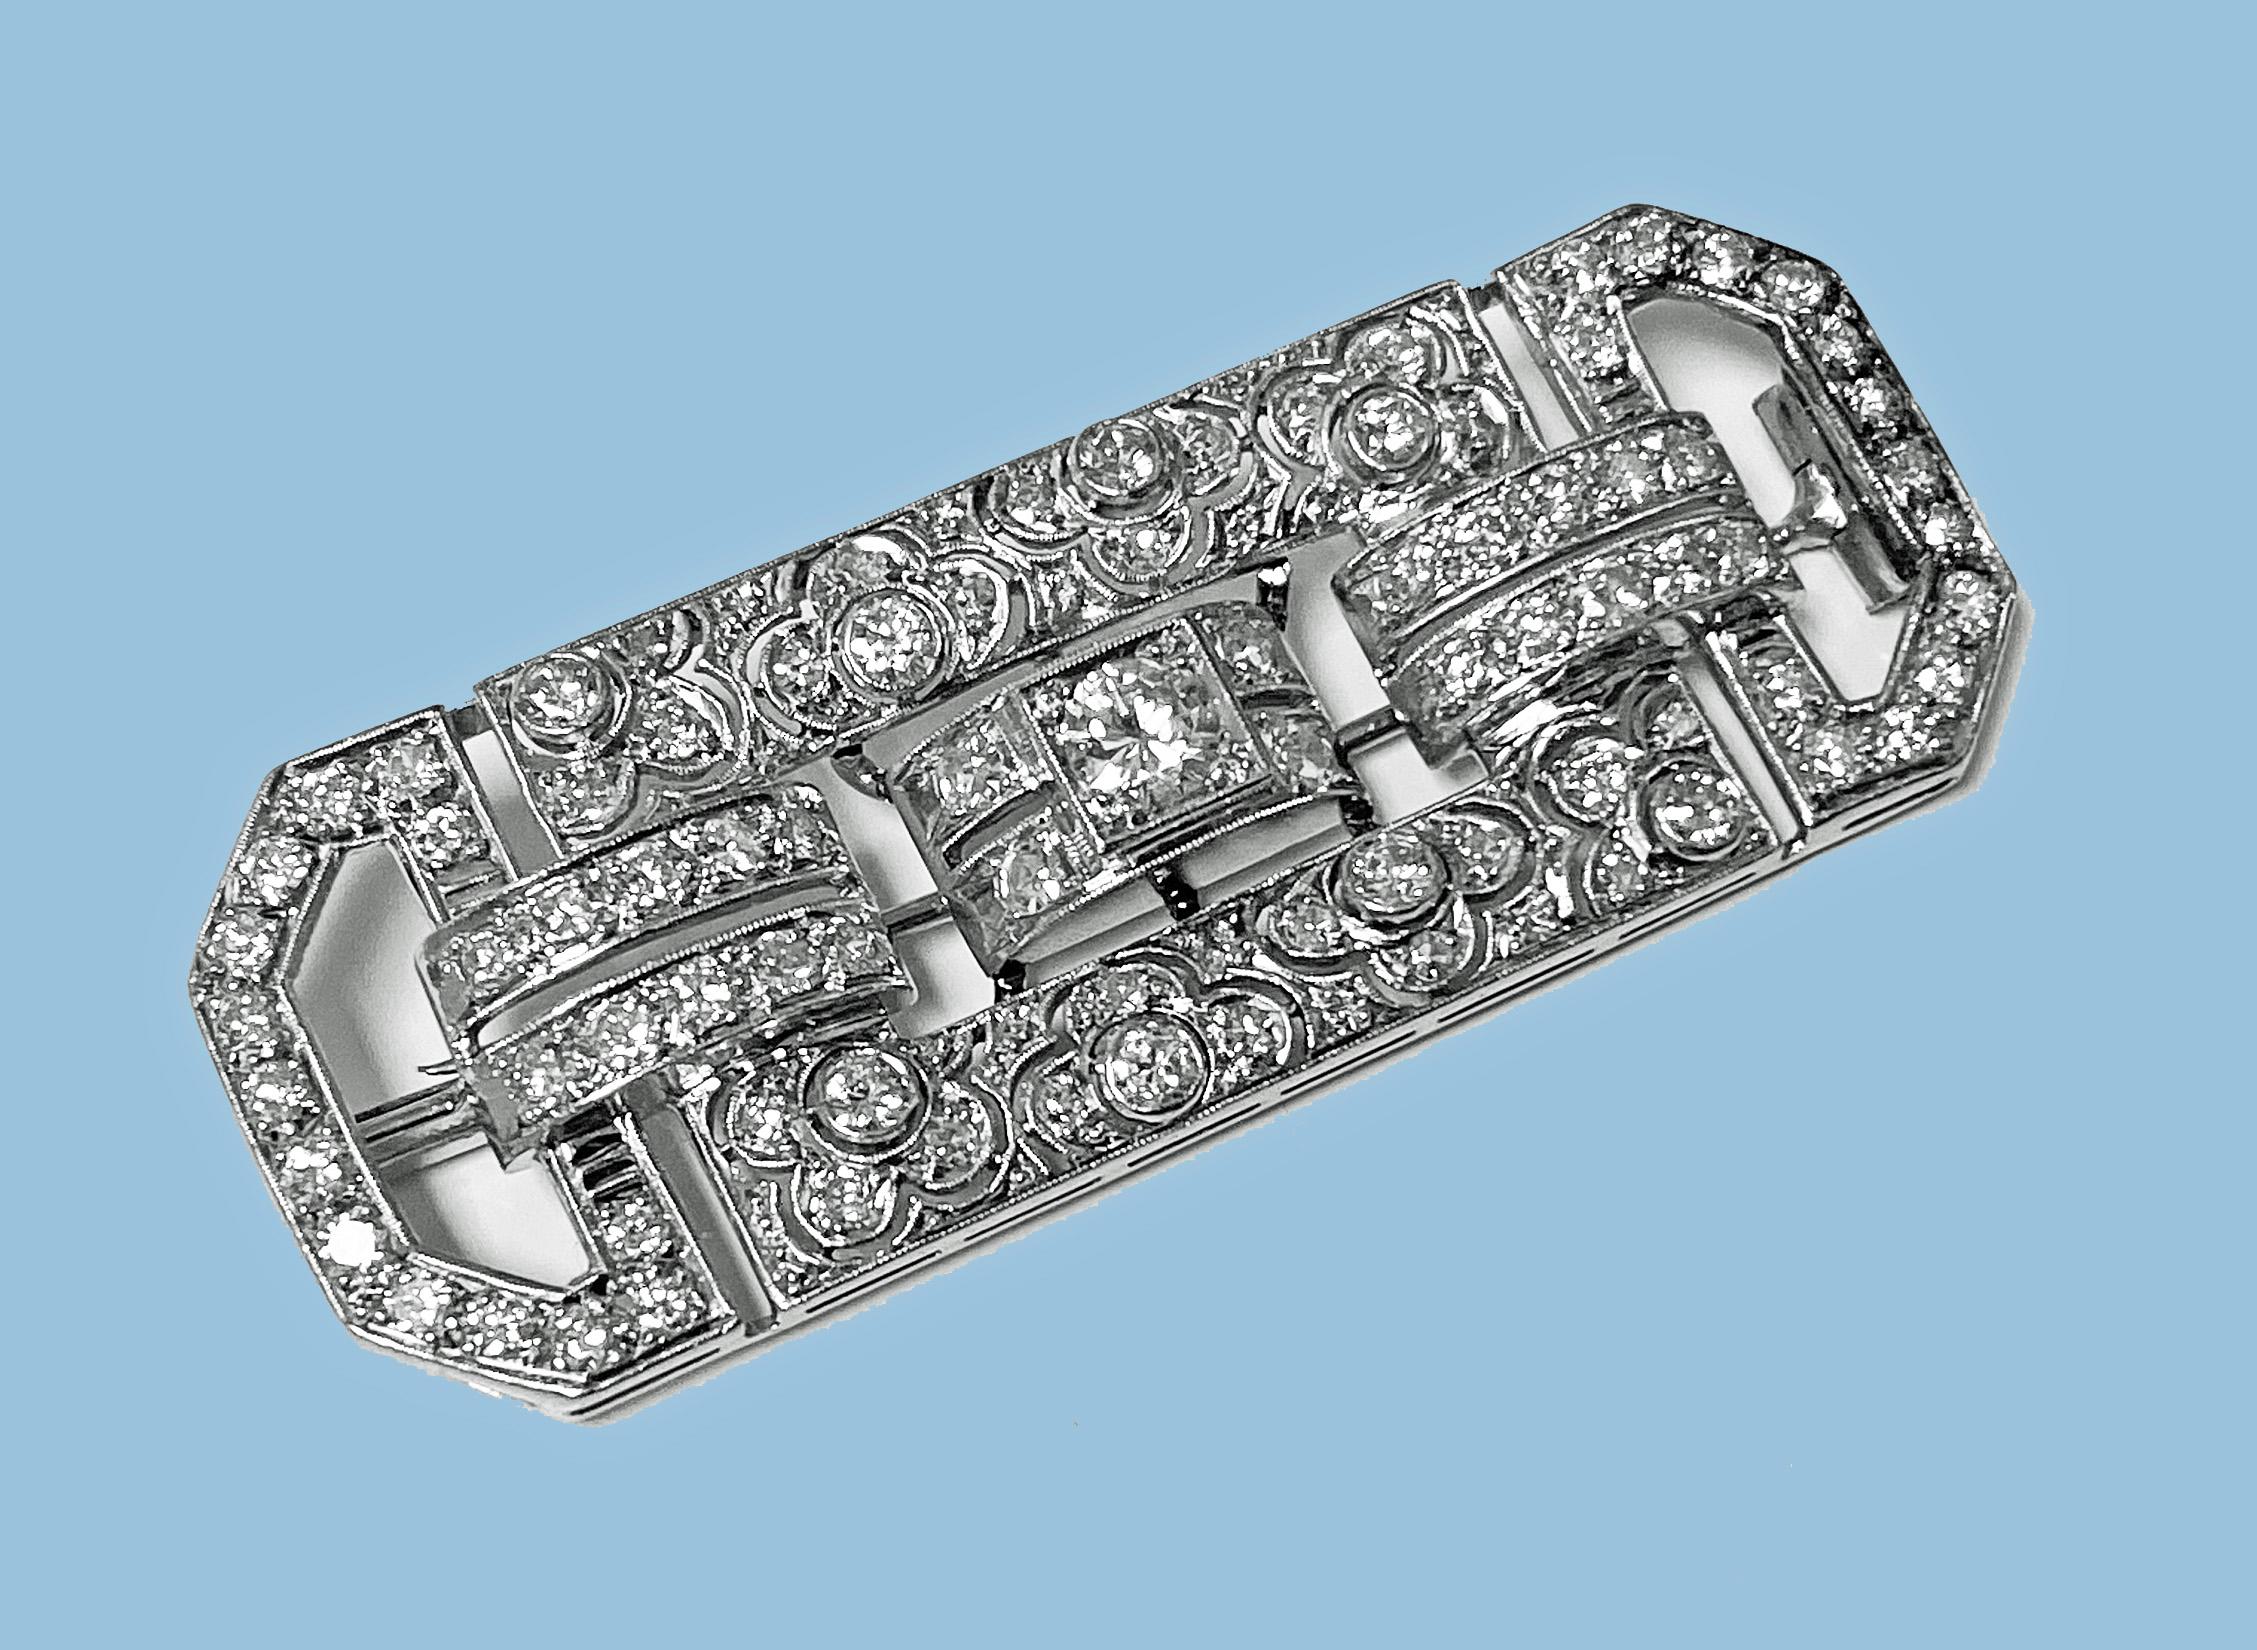 Large Art Deco Diamond and Platinum Brooch C.1925. The brooch of rectangular chamfered corners shape, milligrain set with 86 mixed round brilliant, swiss and single cut diamonds, total approximate weight of 3.85 cts, average VS1-SI1 clarity, average